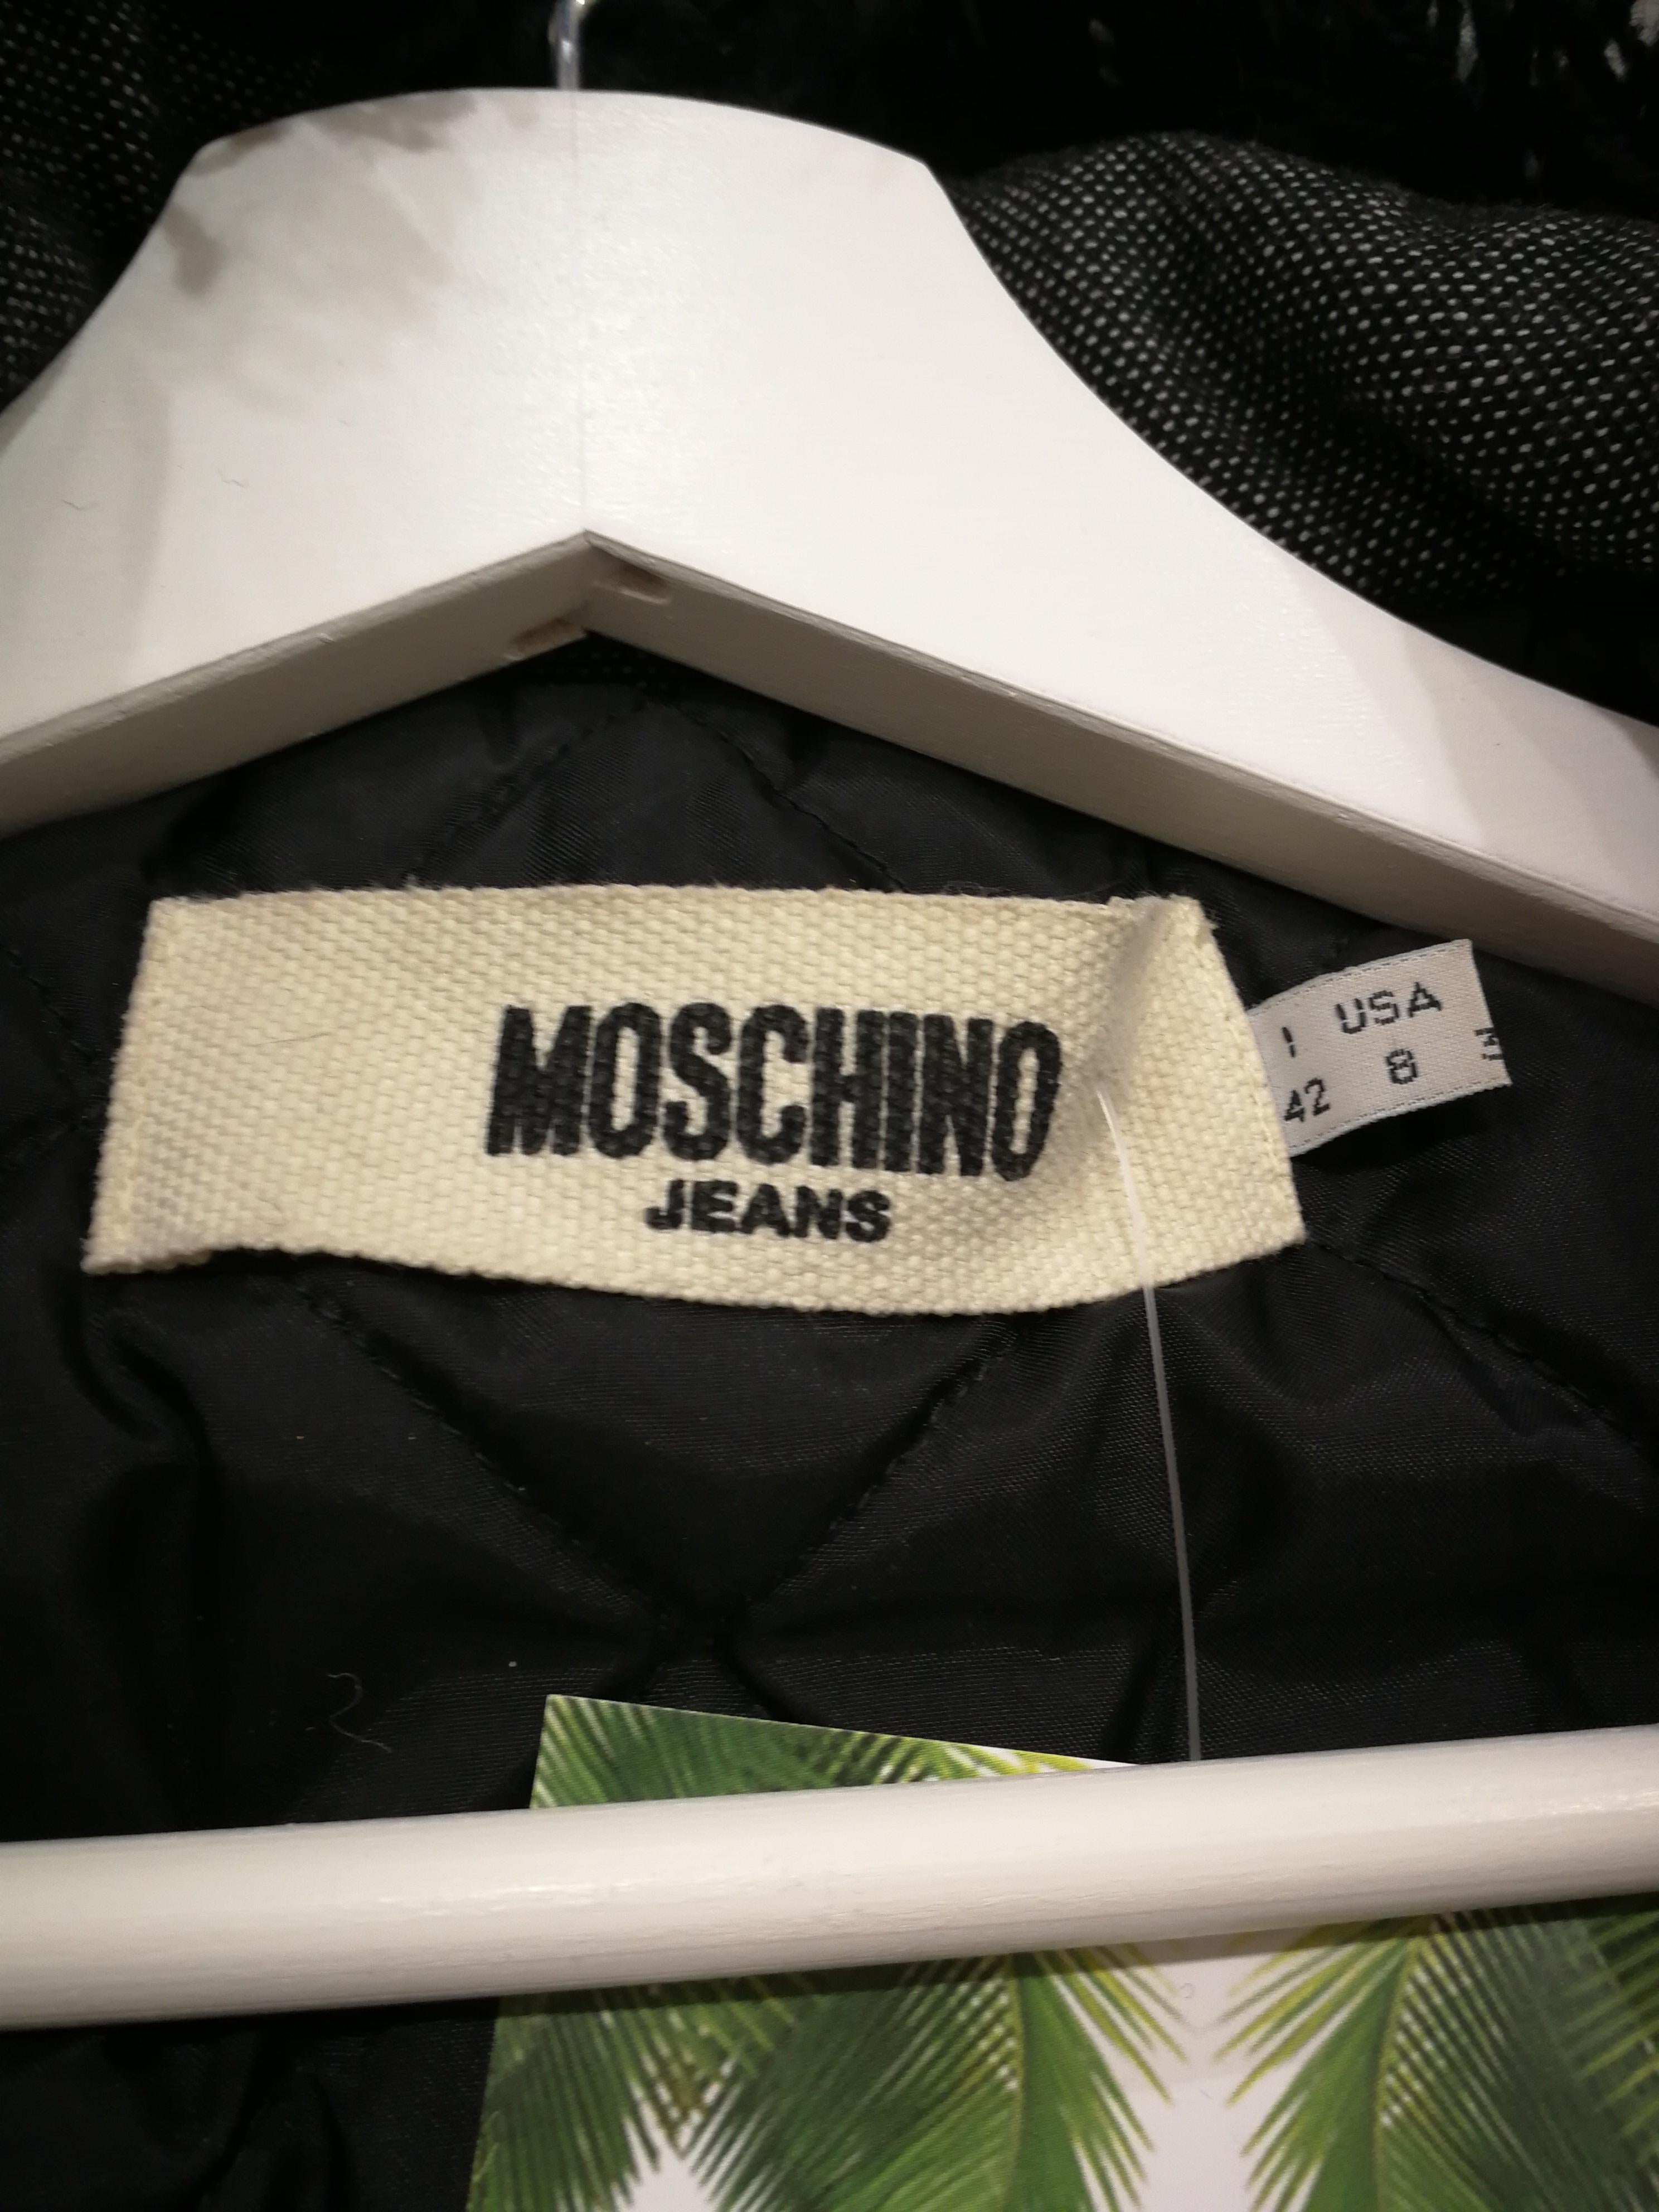 Moschino JEANS Shells Fringes Jacket For Sale 6